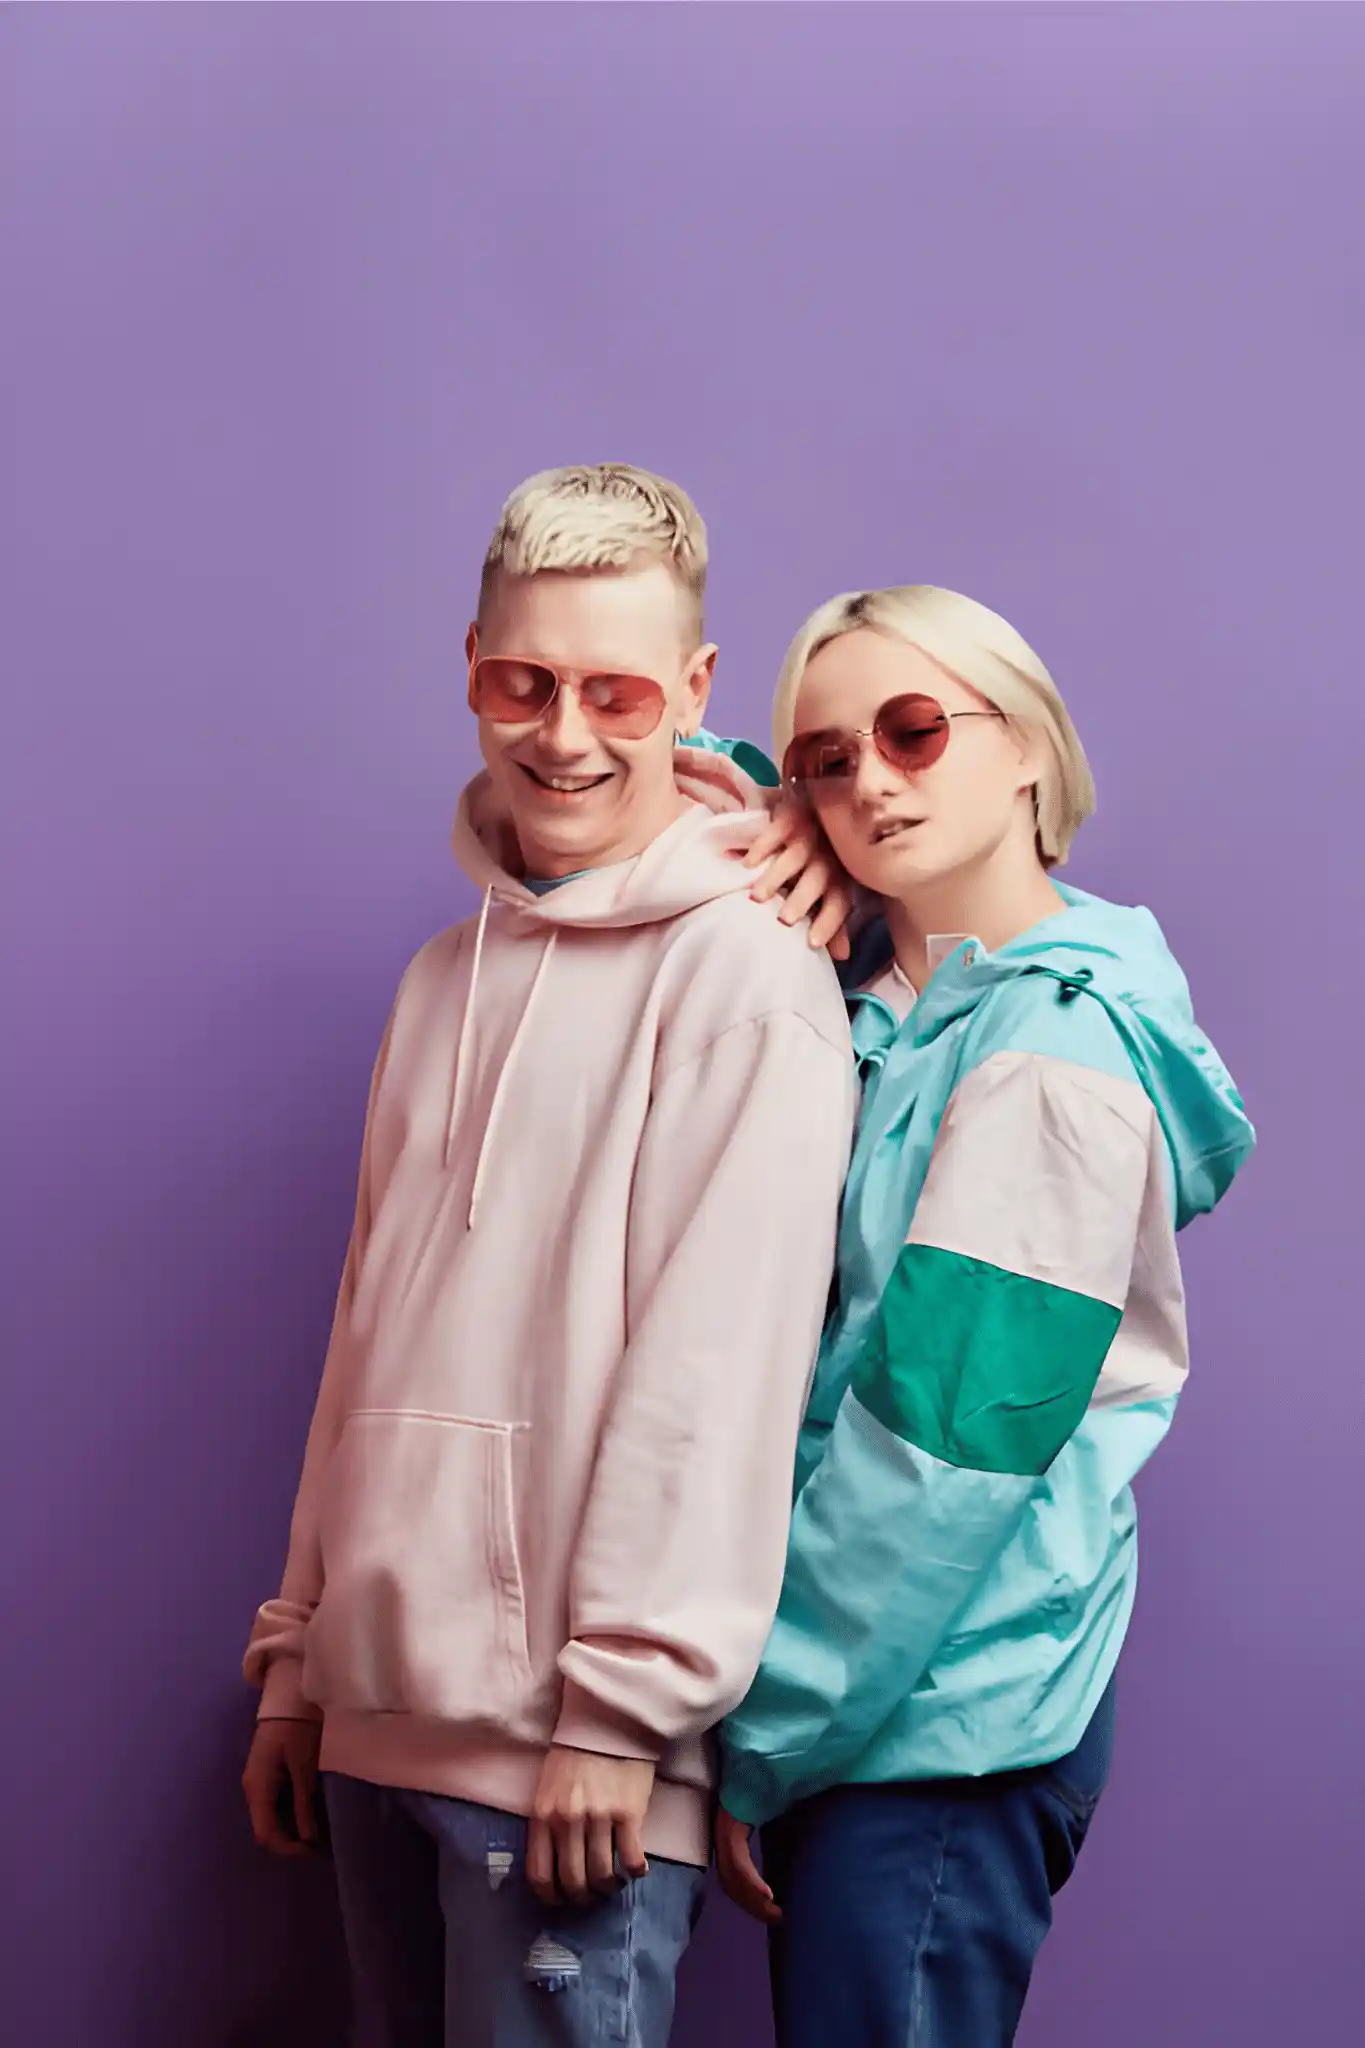 Two young people in a studio photoshoot.